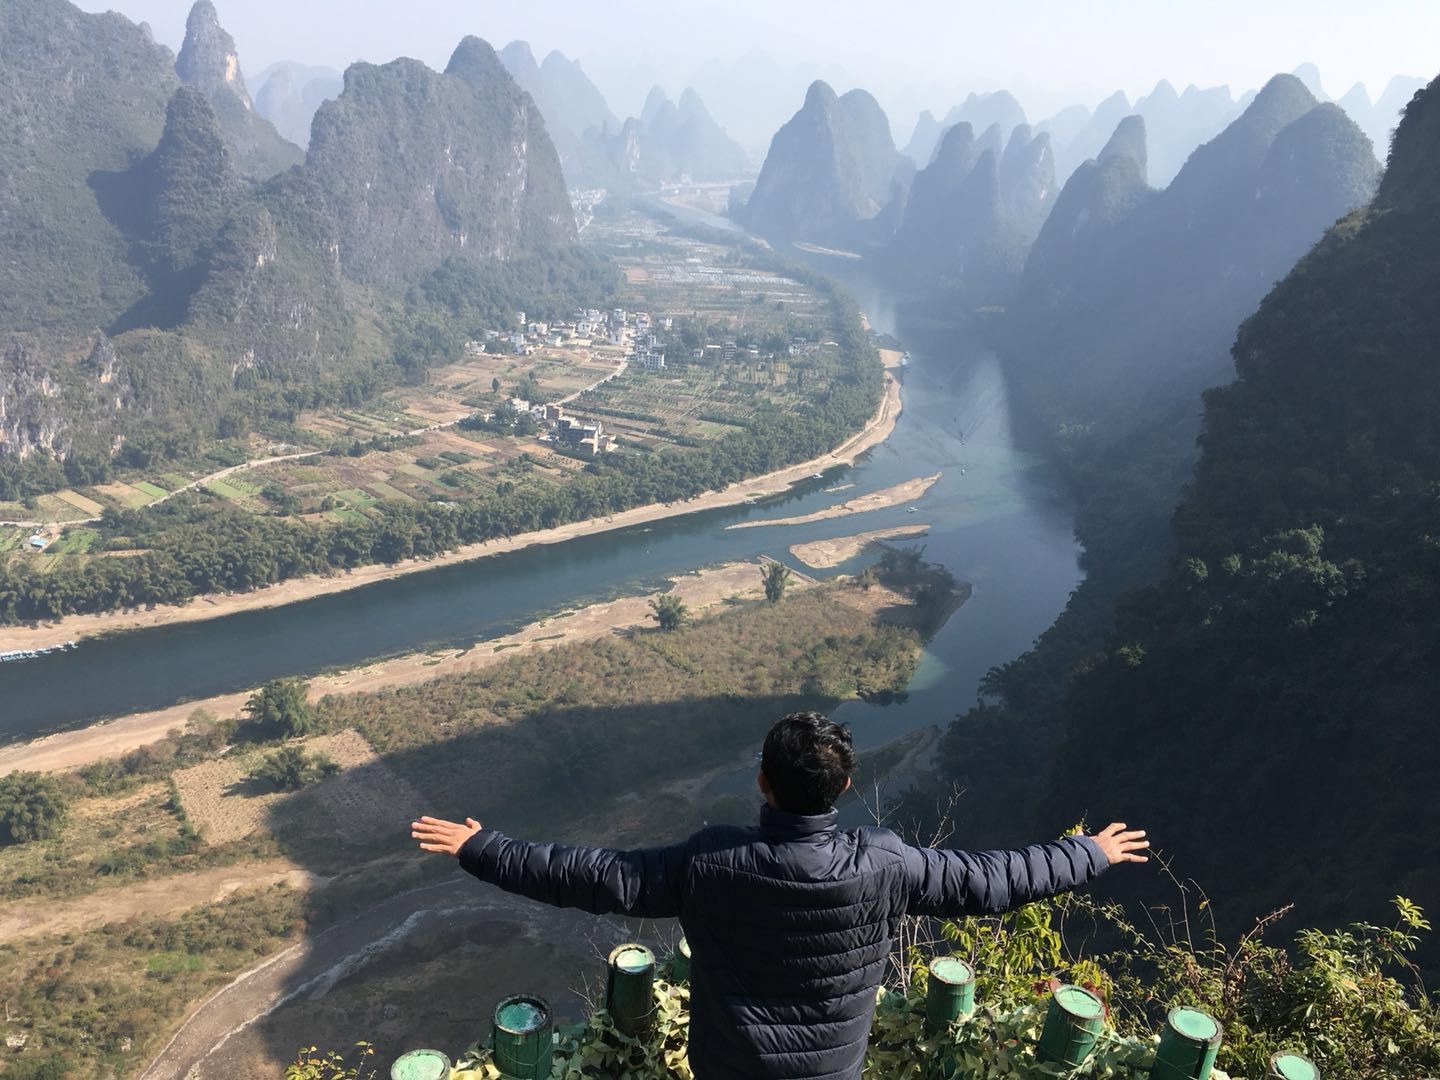 3 Days Itinerary for Guilin and Yangshuo – The best kept secret of China